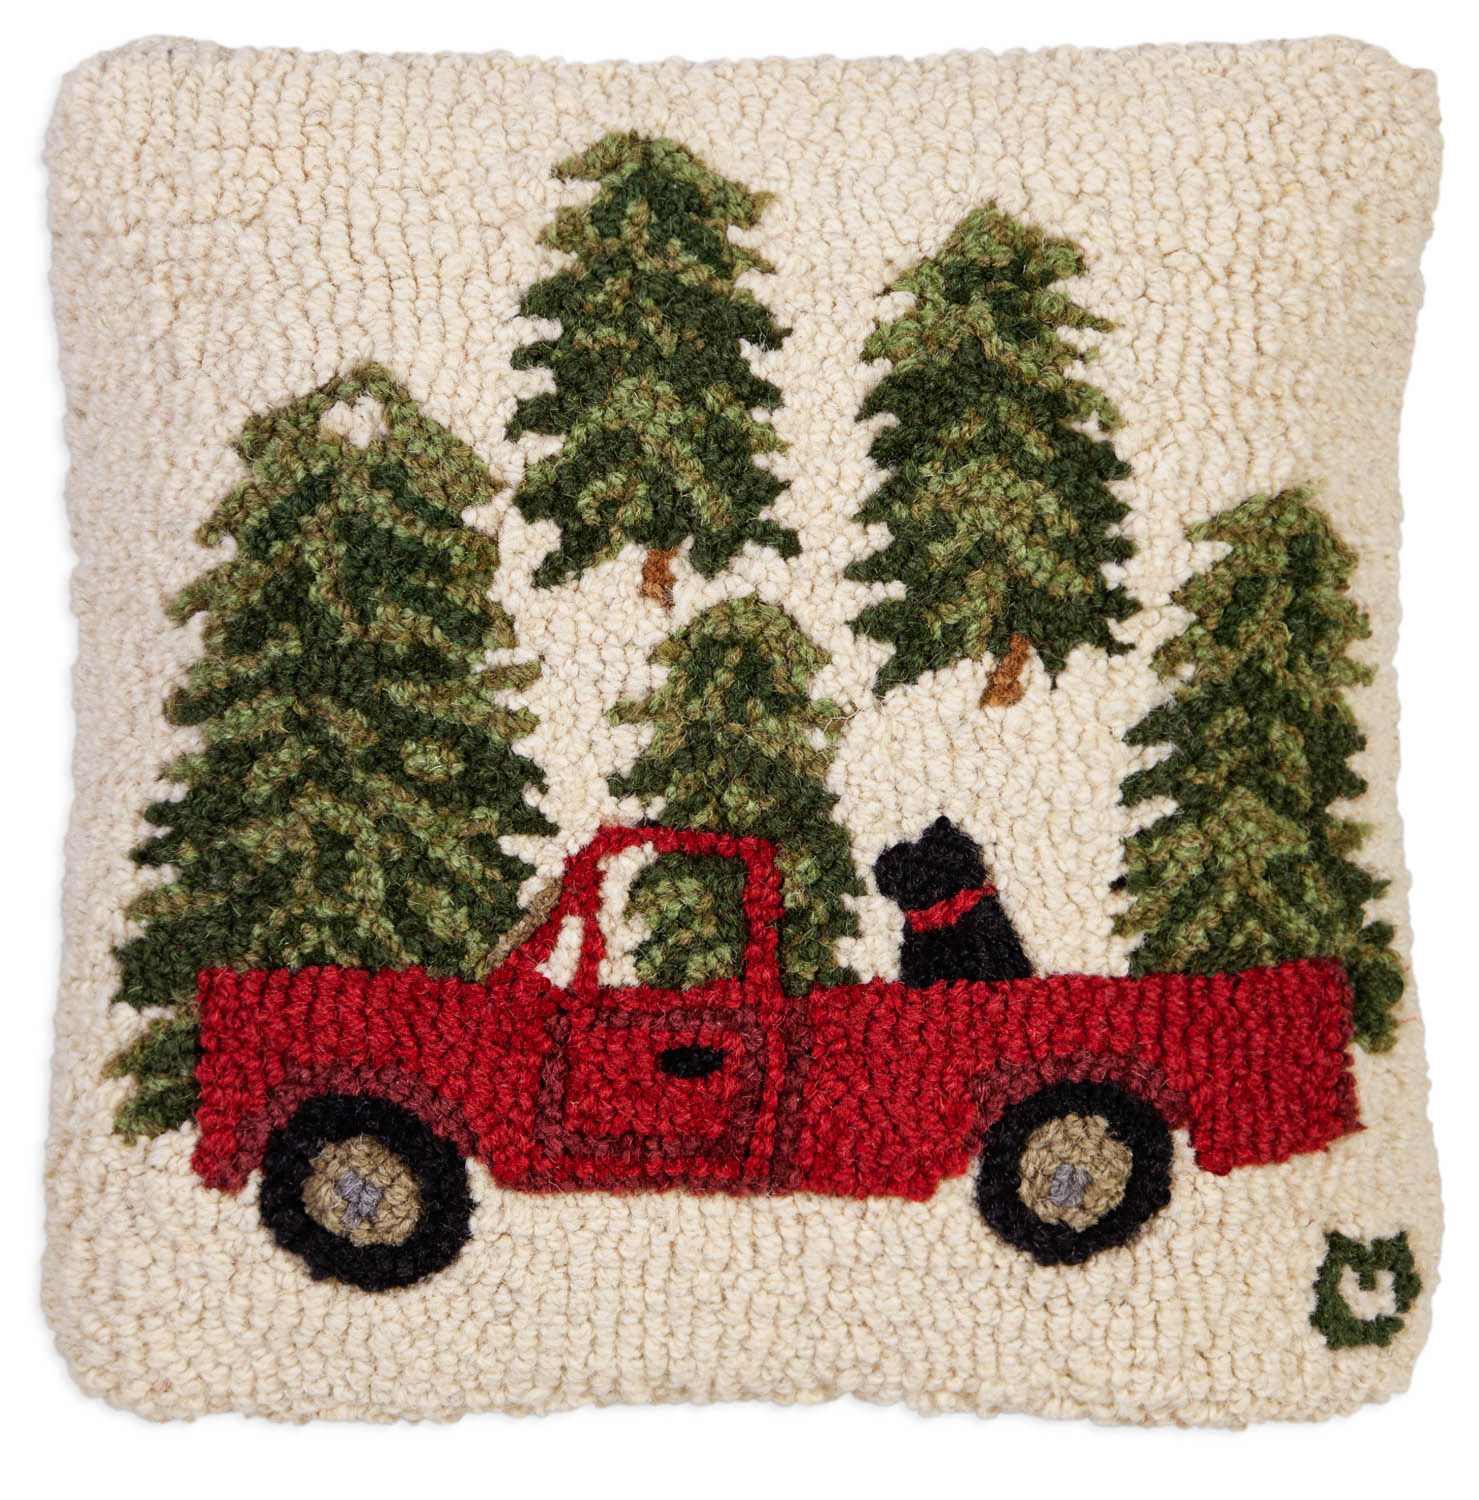 Dog in red truck wool pillow.